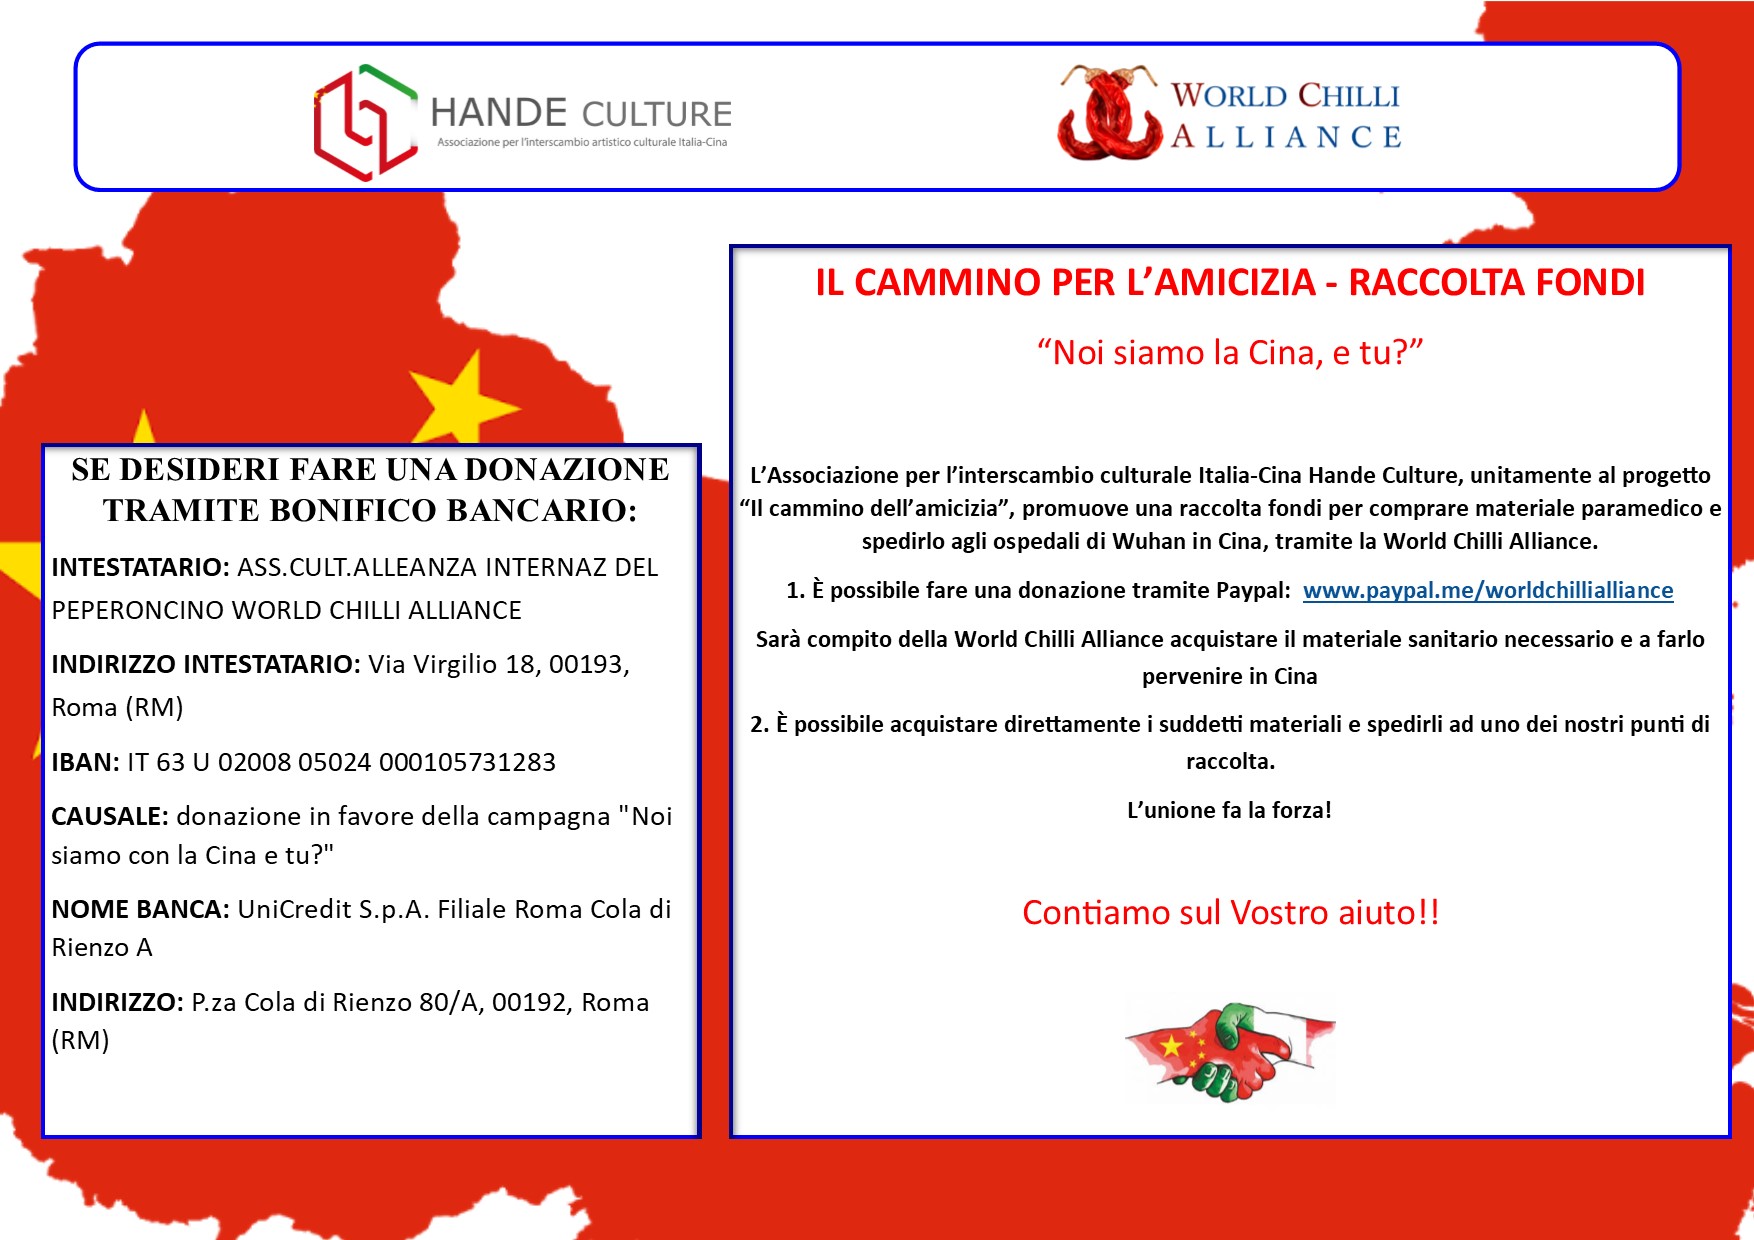 Hande Culture Association is with World Chilli Alliance in support of China's fight against the coronavius outbreak